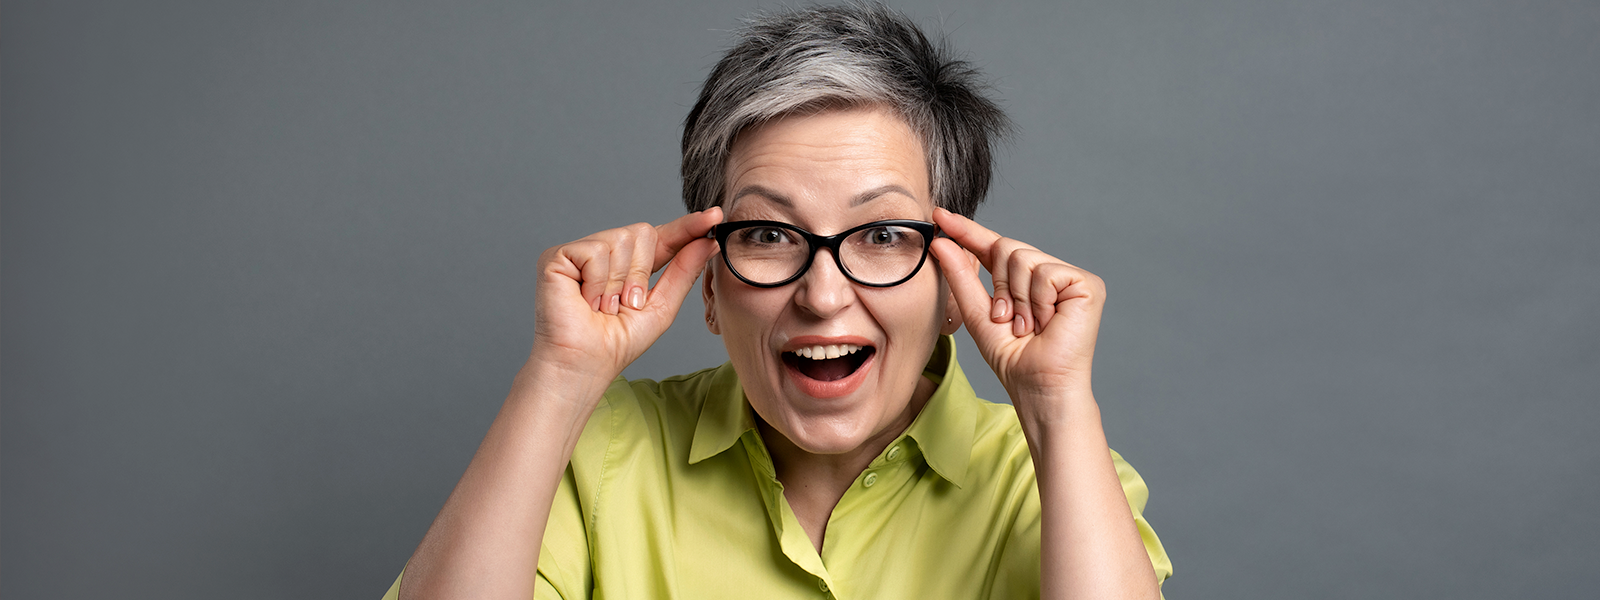 A GenX woman wearing glasses, looking directly at the camera.